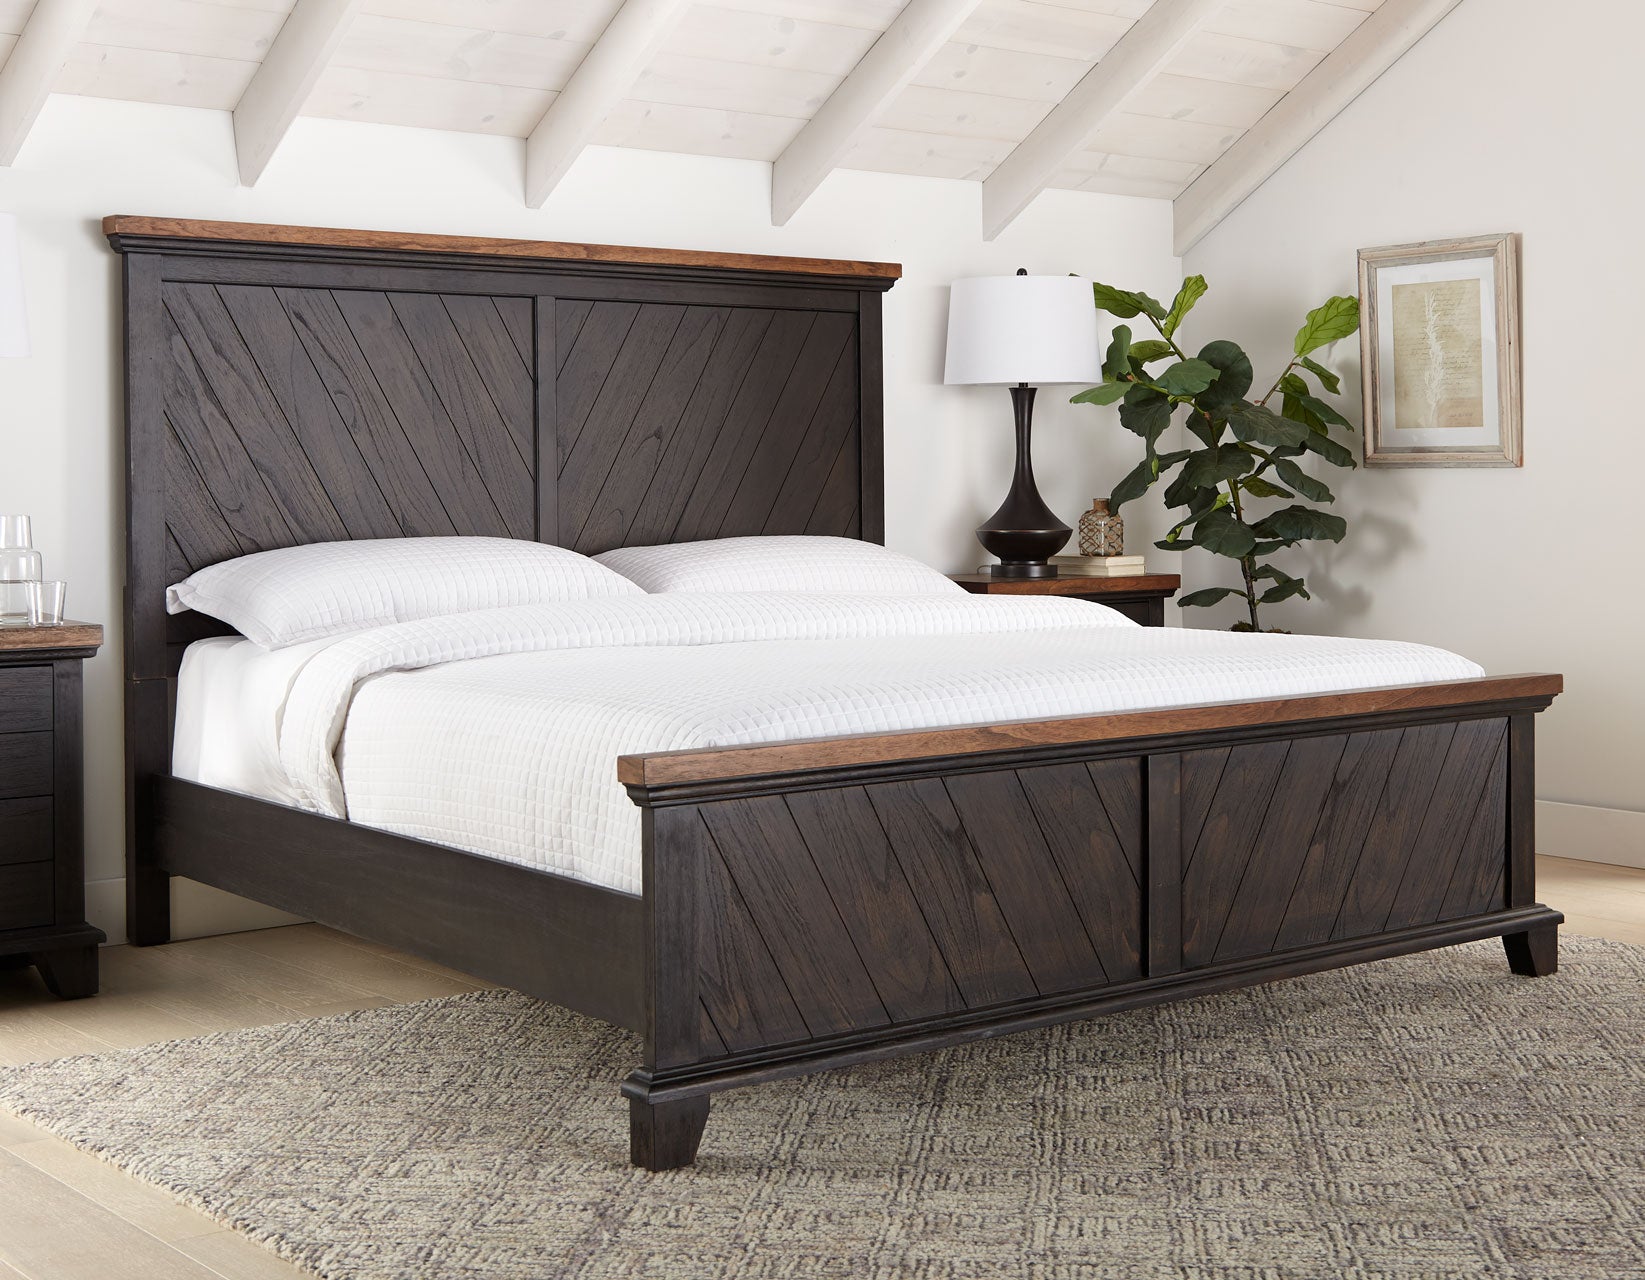 Bear Creek Brown Bedroom Collection by Steve Silver